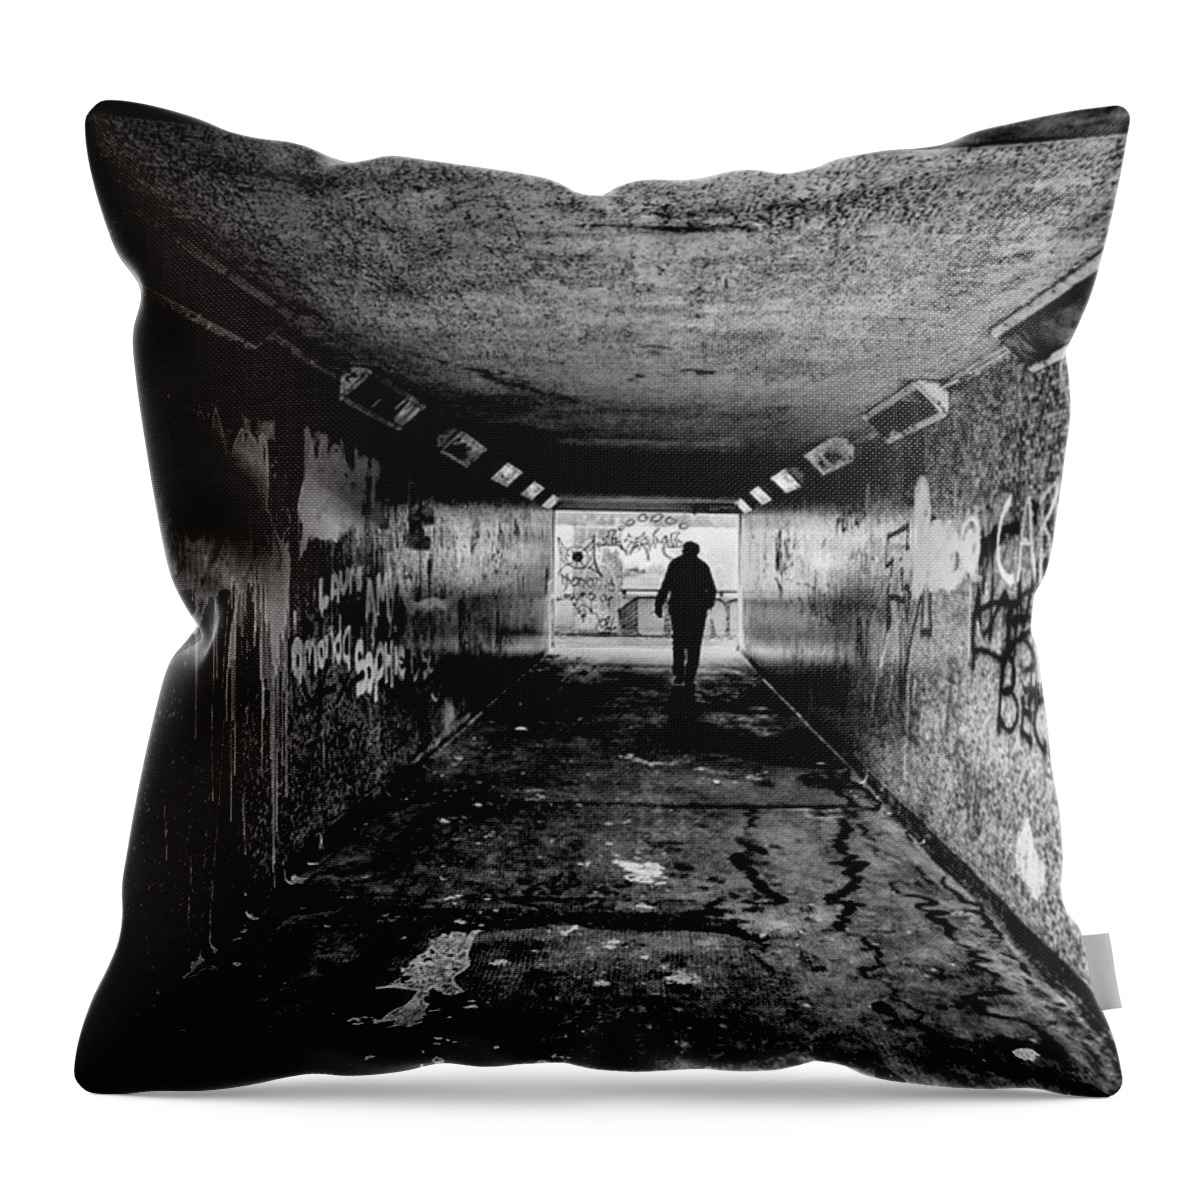 Subway Throw Pillow featuring the photograph Man in Subway by Nigel R Bell